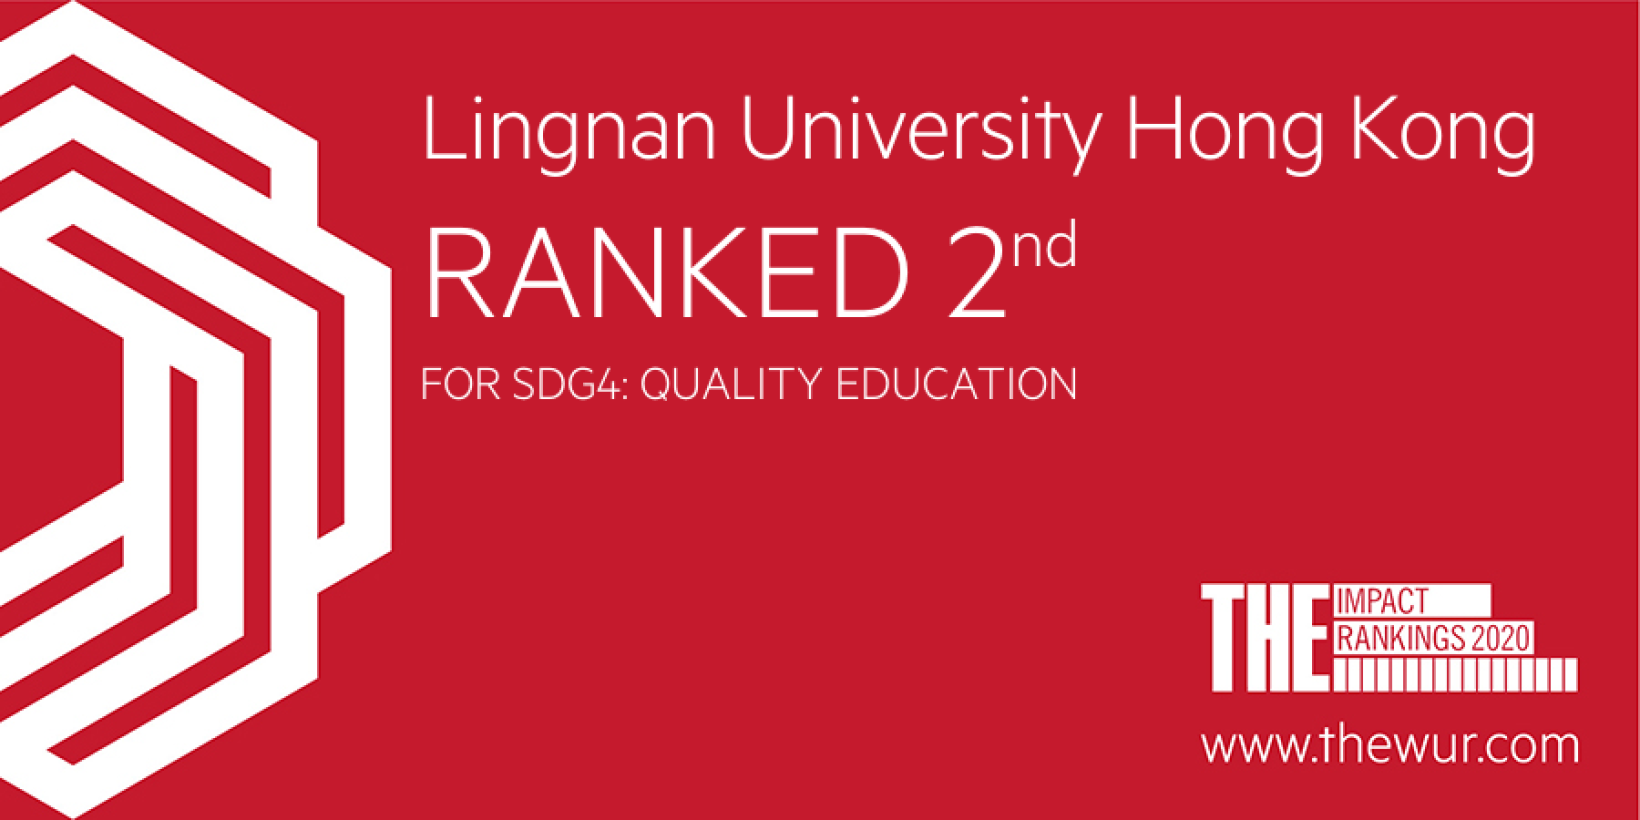 LU ranks second worldwide for 'Quality Education' in THE University Impact Rankings 2020